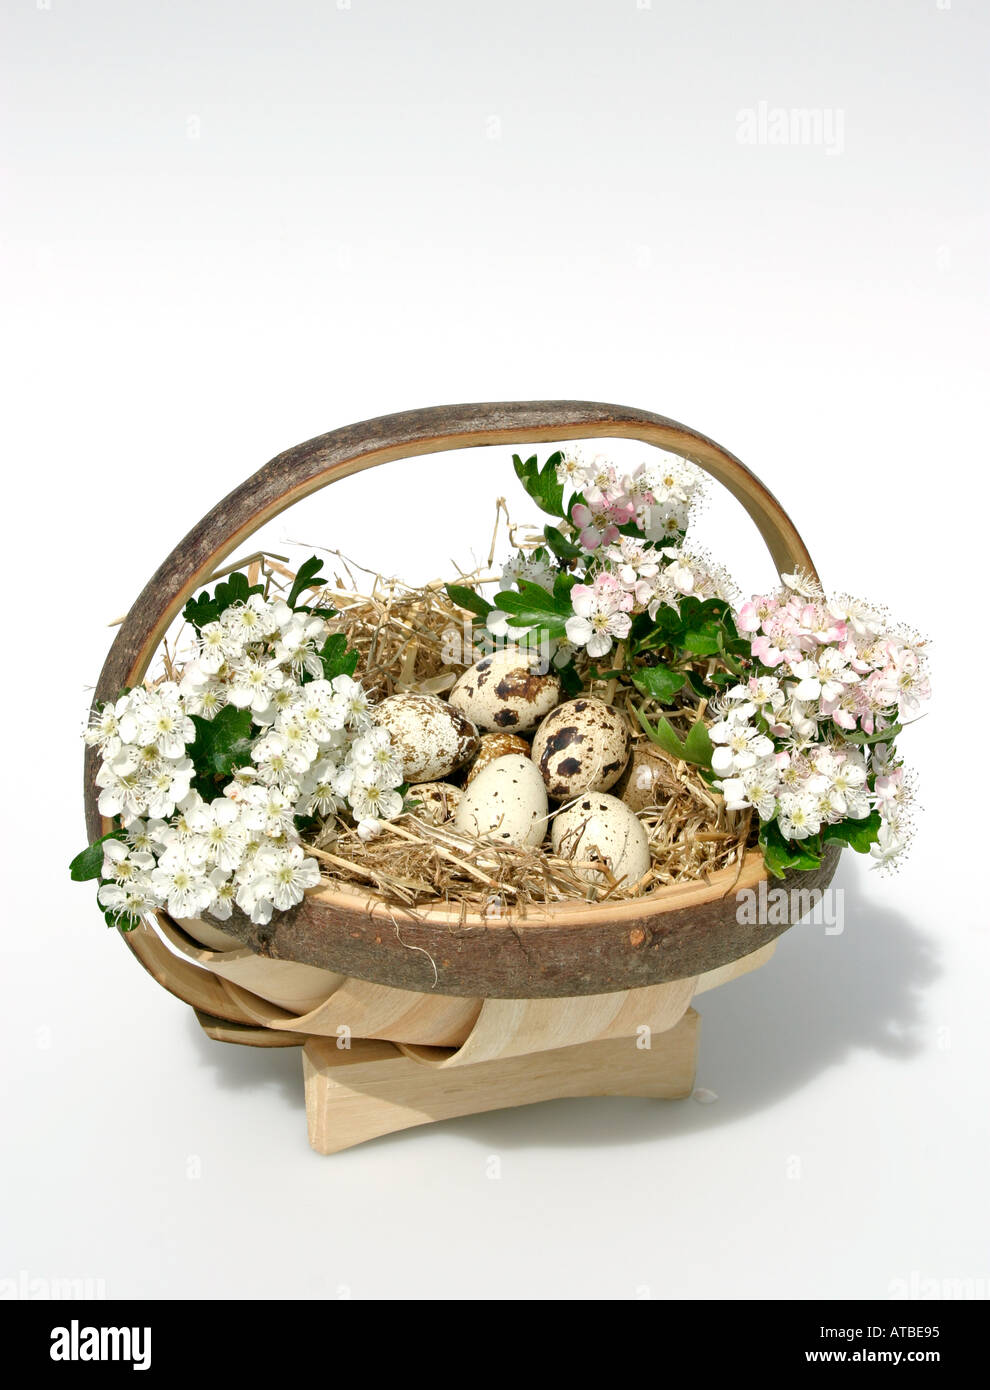 Country living. Celebrations for Easter and Spring with a hay lined basket  full of quail eggs and hawthorn blossom. Stock Photo